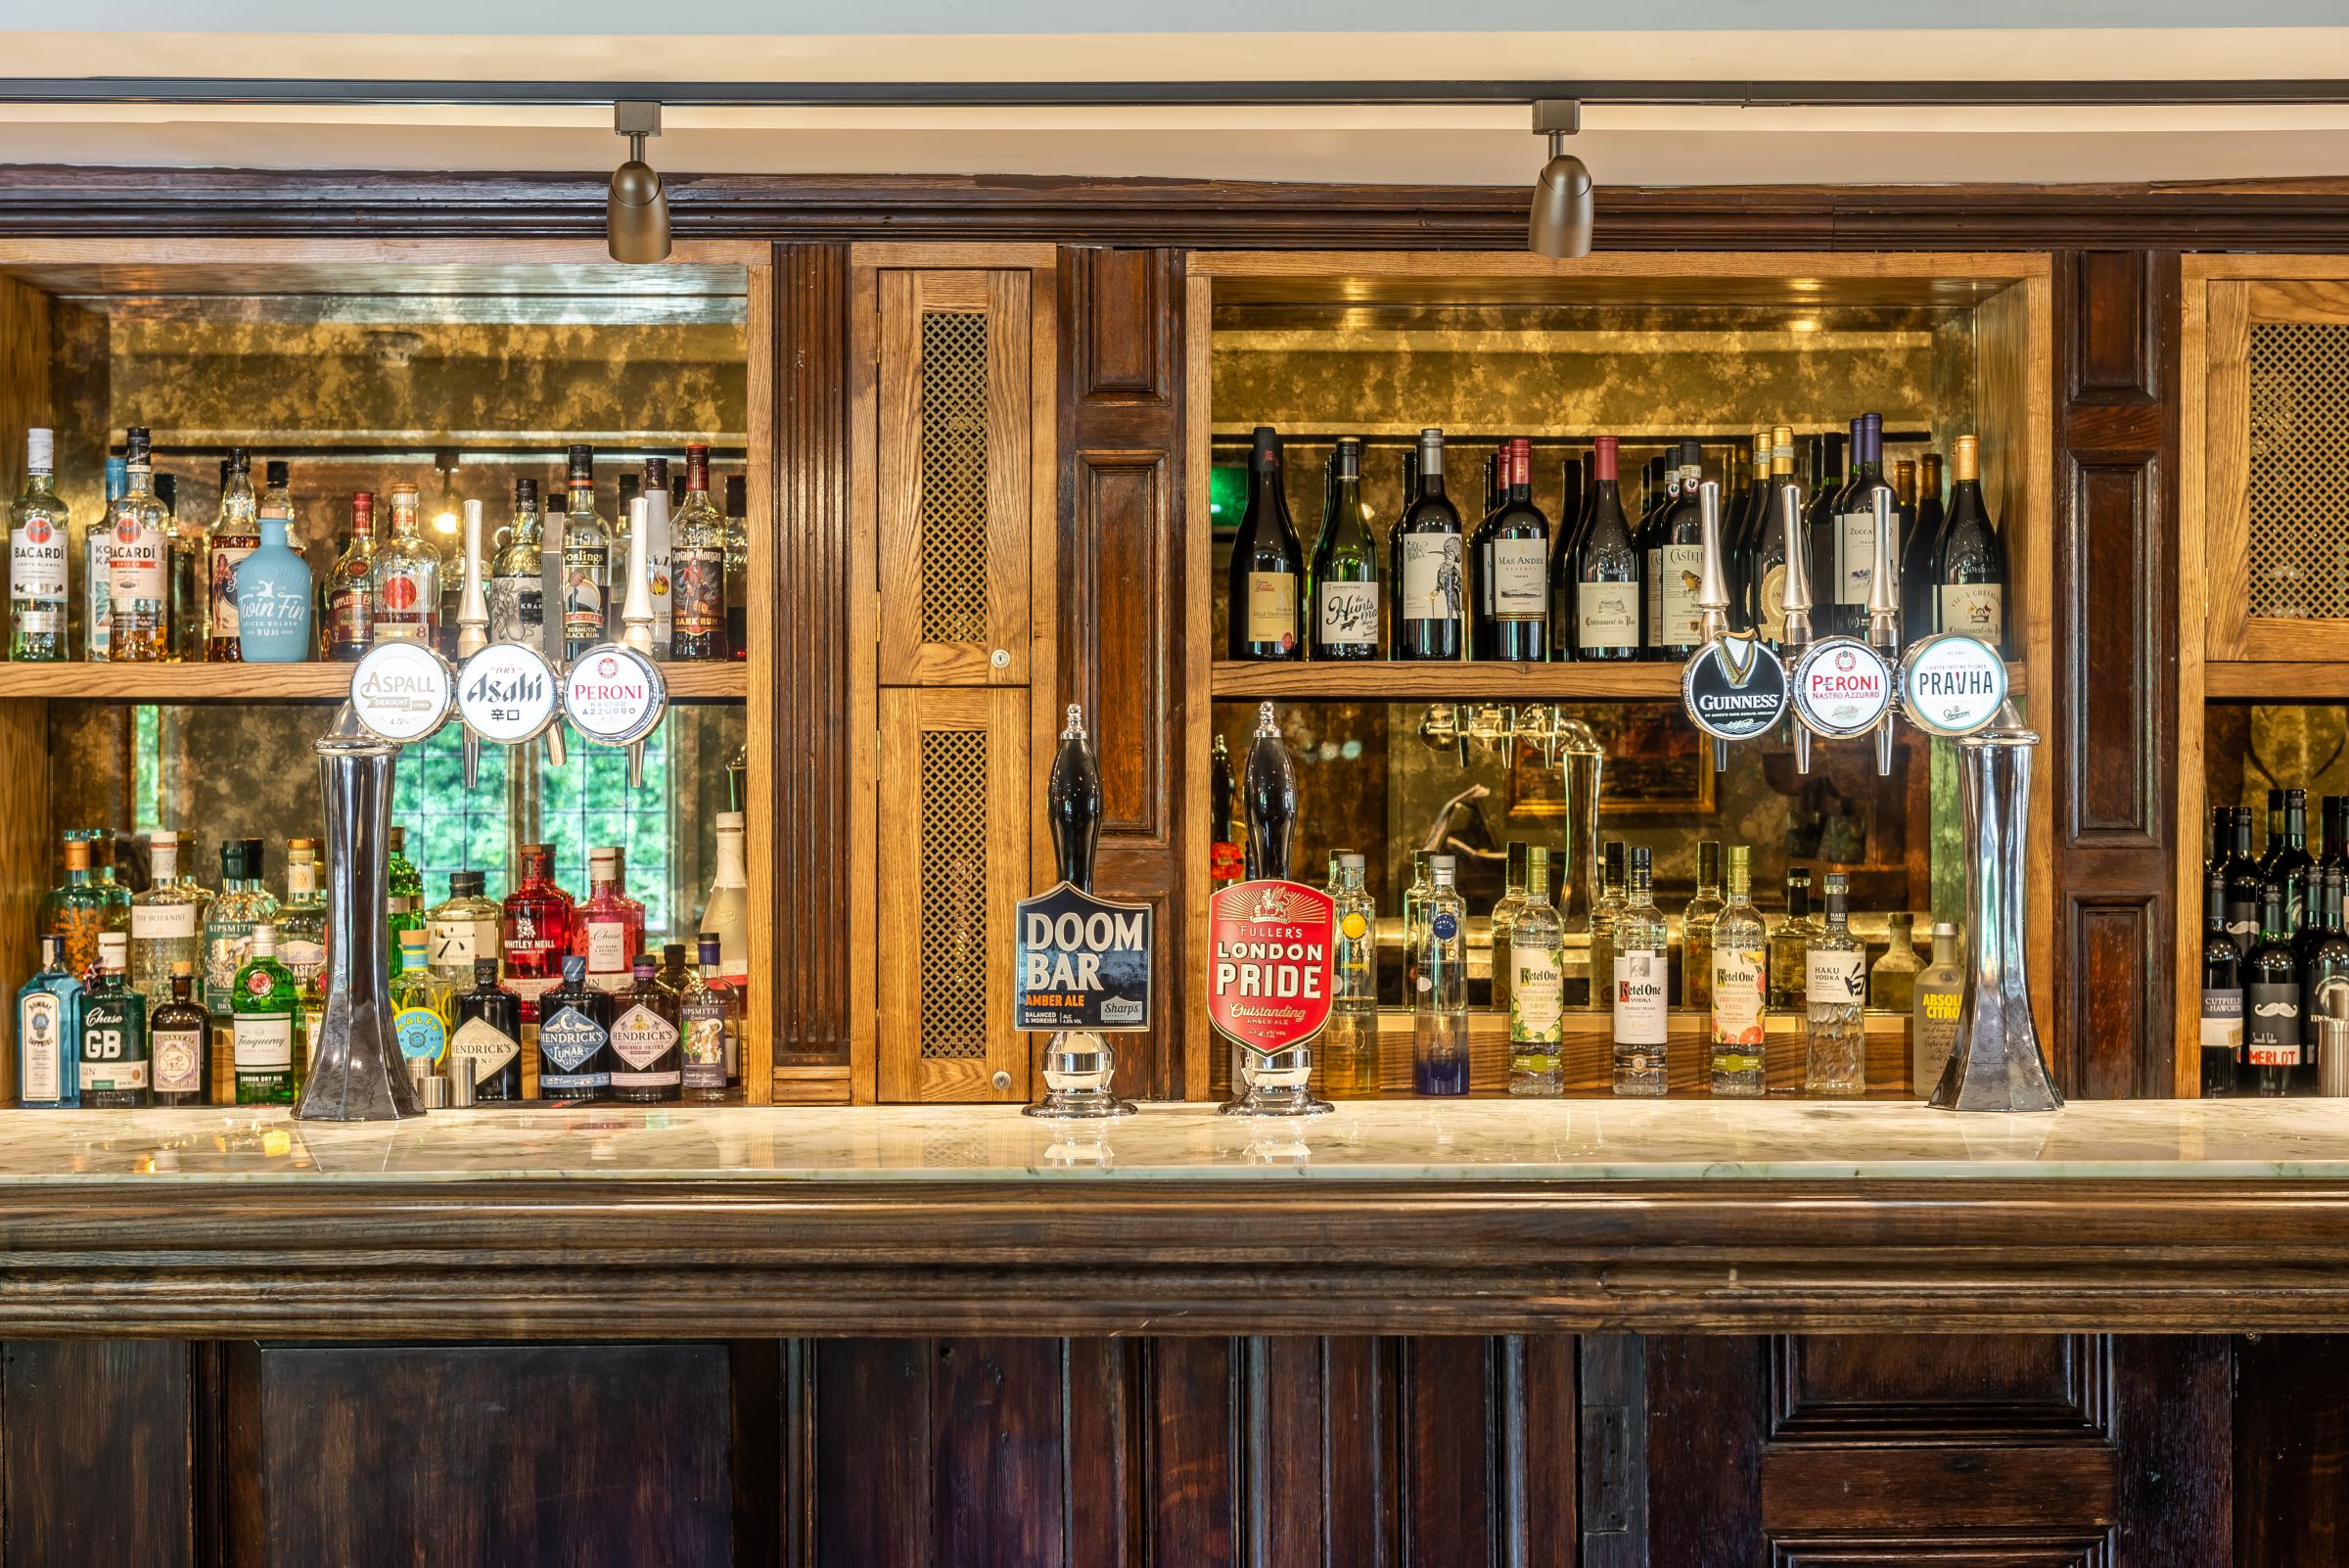 The Spade Oak has re-opened after a month closed due to a refurbishment